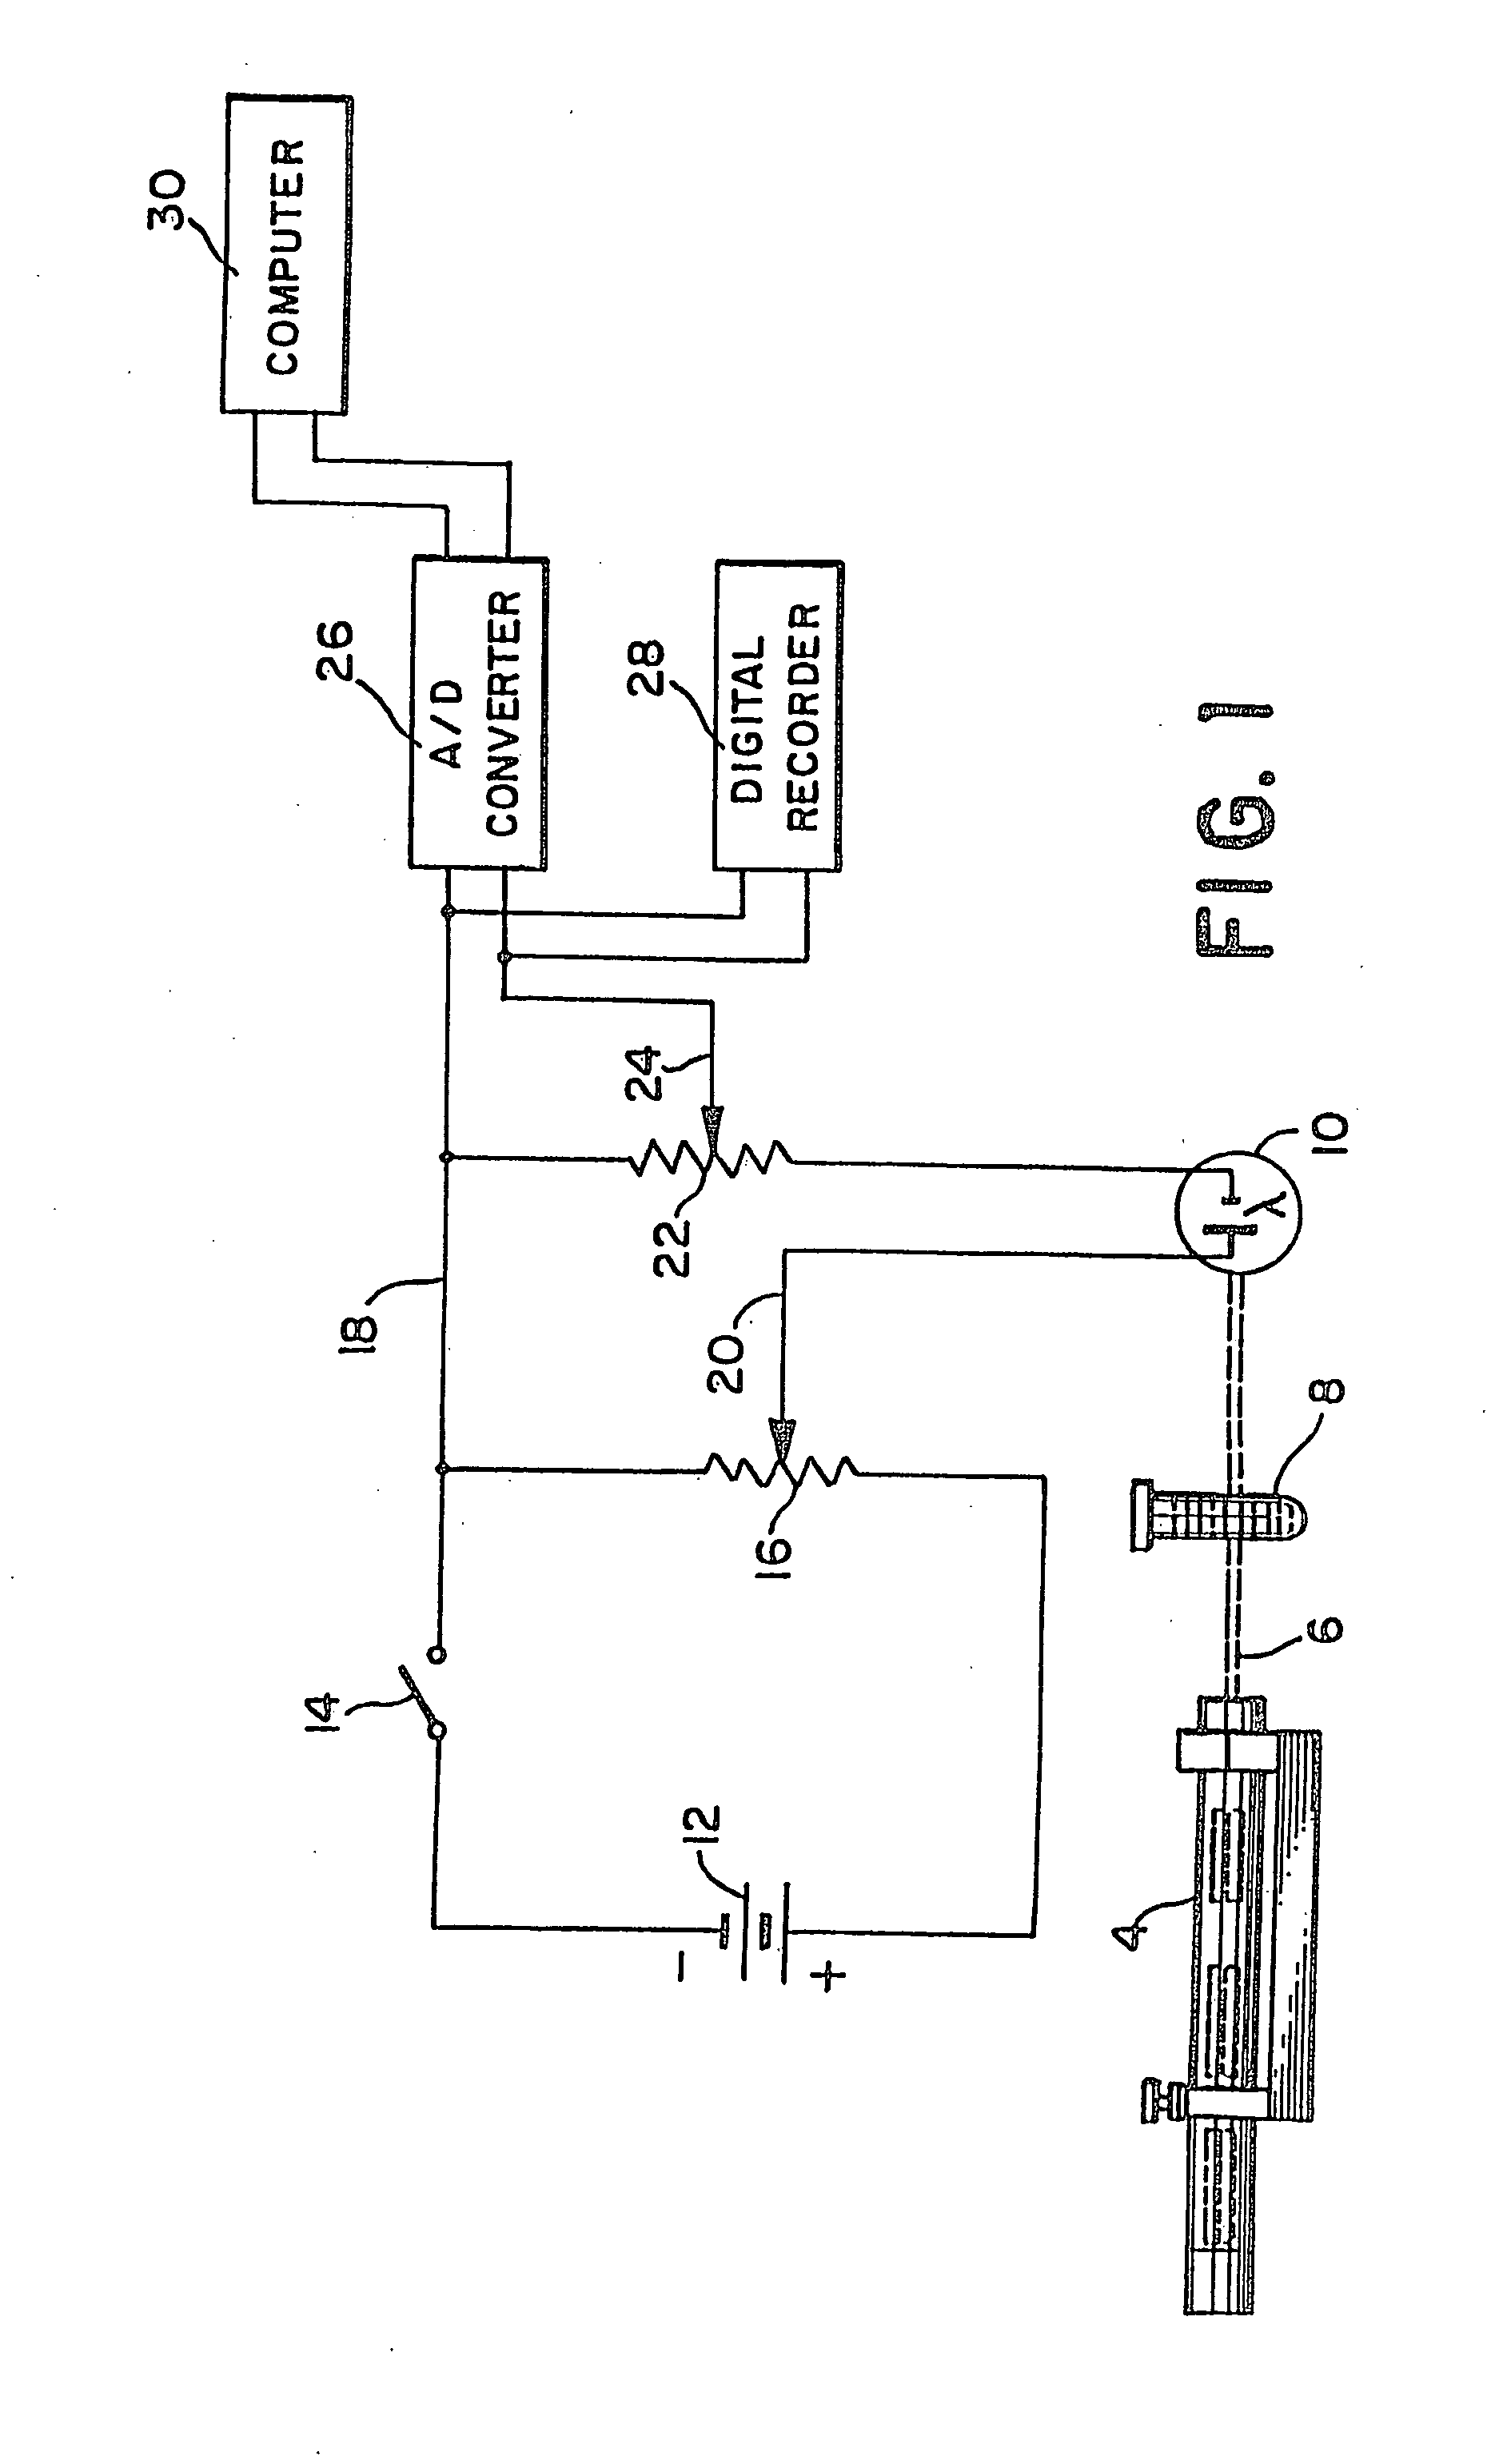 Method and apparatus for determining anticoagulant therapy factors